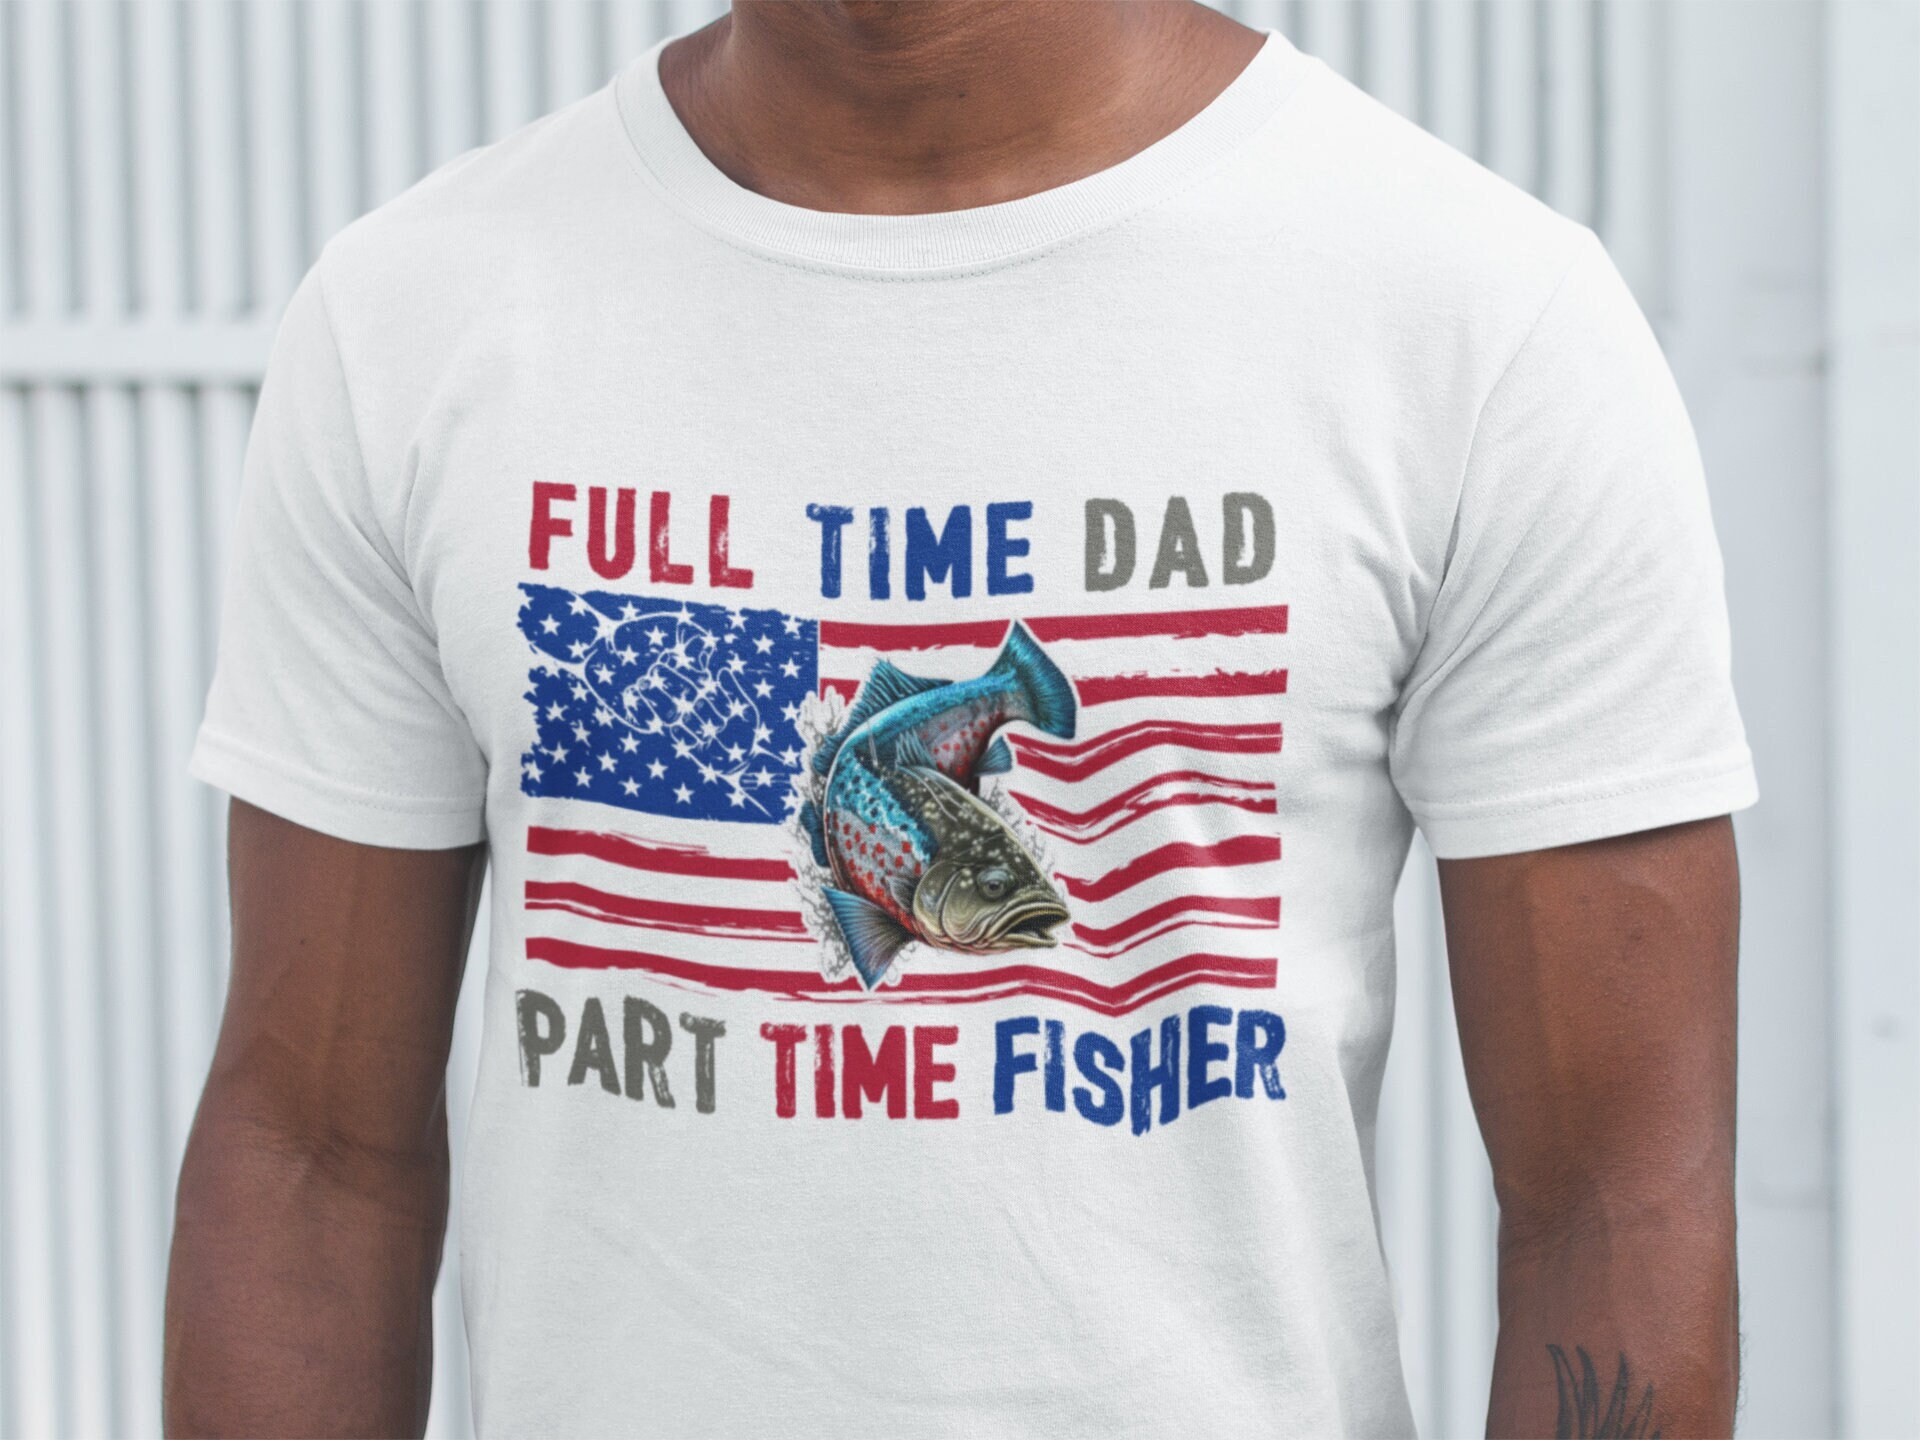 Fishing T-shirt, Maister Baiter, Funny Mens Top, Gift for Fisherman, Dad  Boyfriend Present for Fish Fan Fishers Tshirt up to Large Size -  Canada